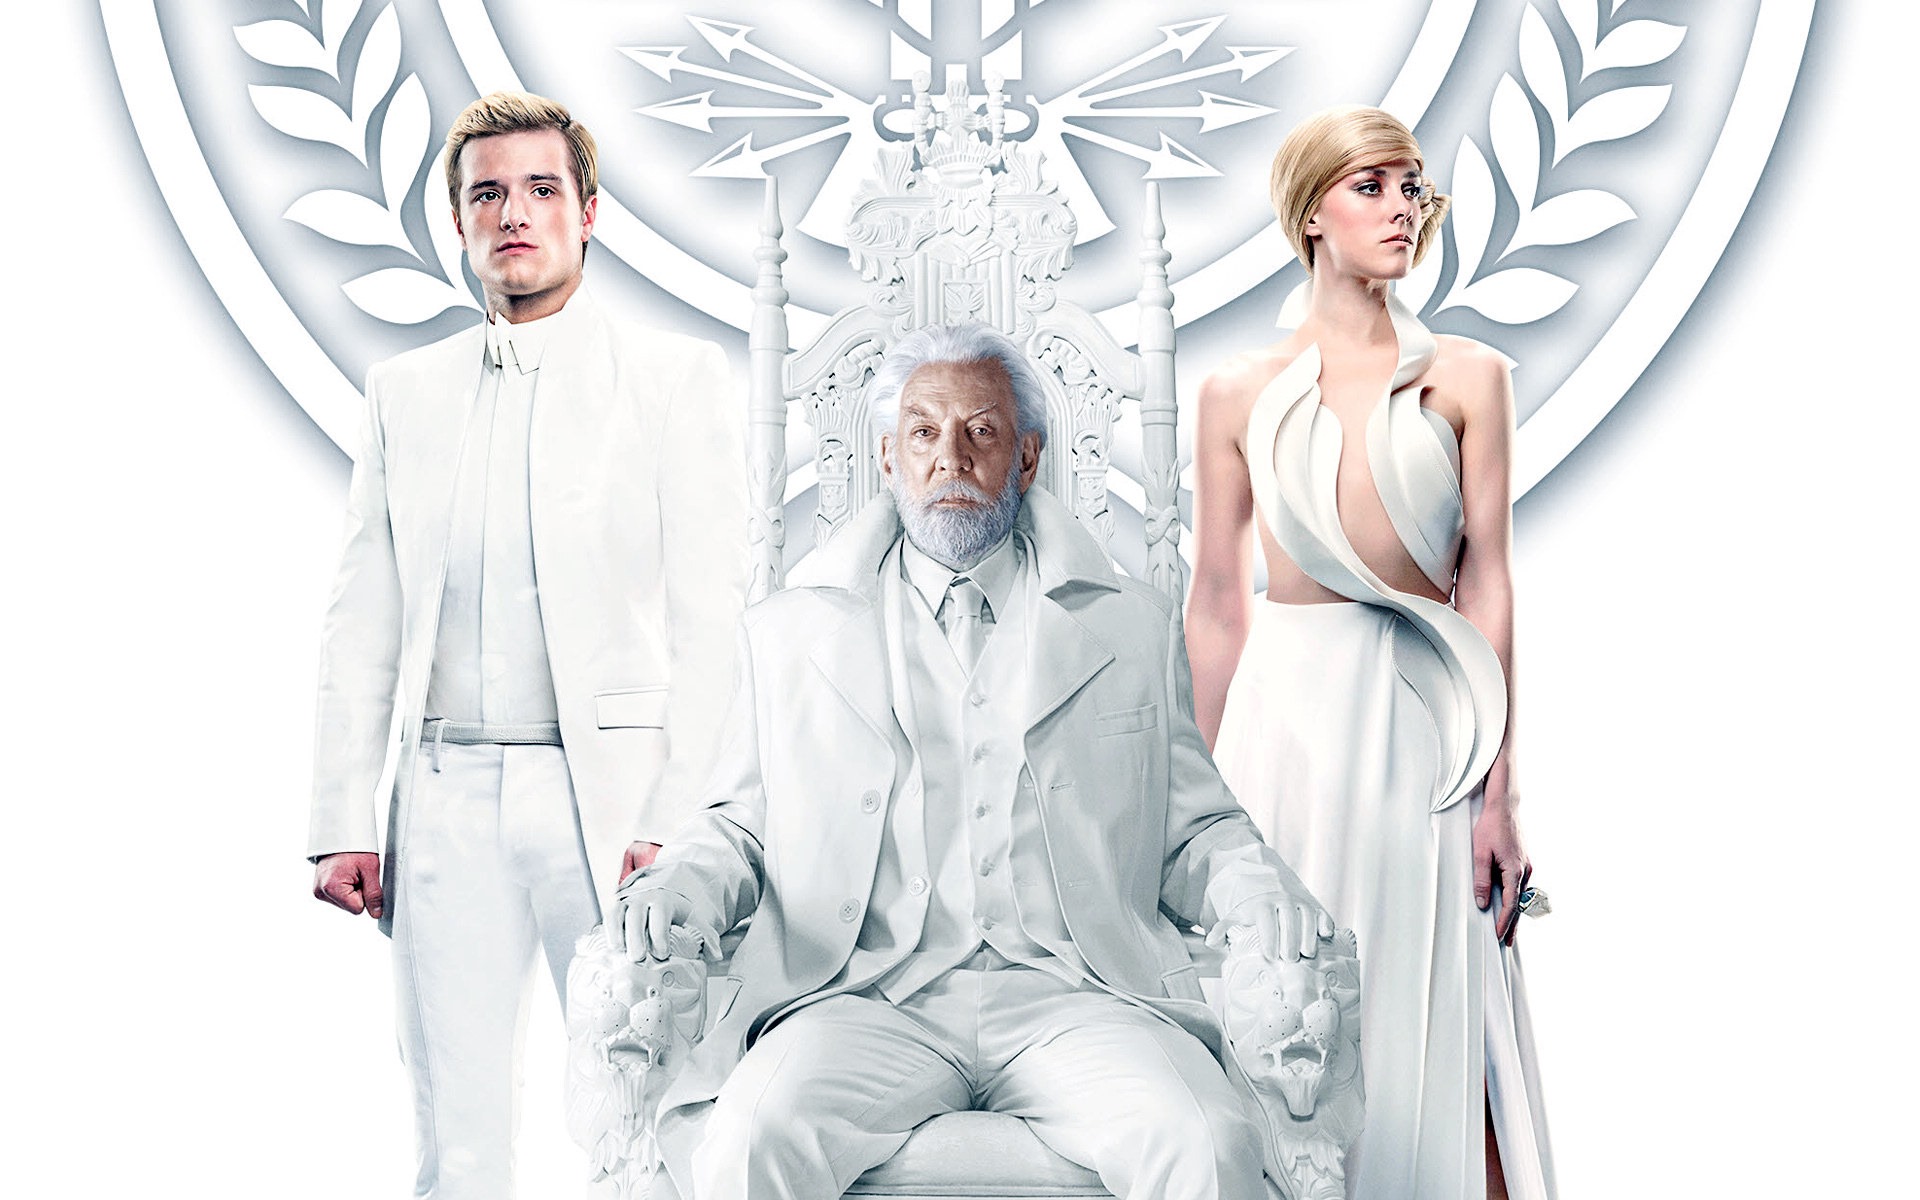 The Hunger Games: Mockingjay HD wallpapers #8 - 1920x1200